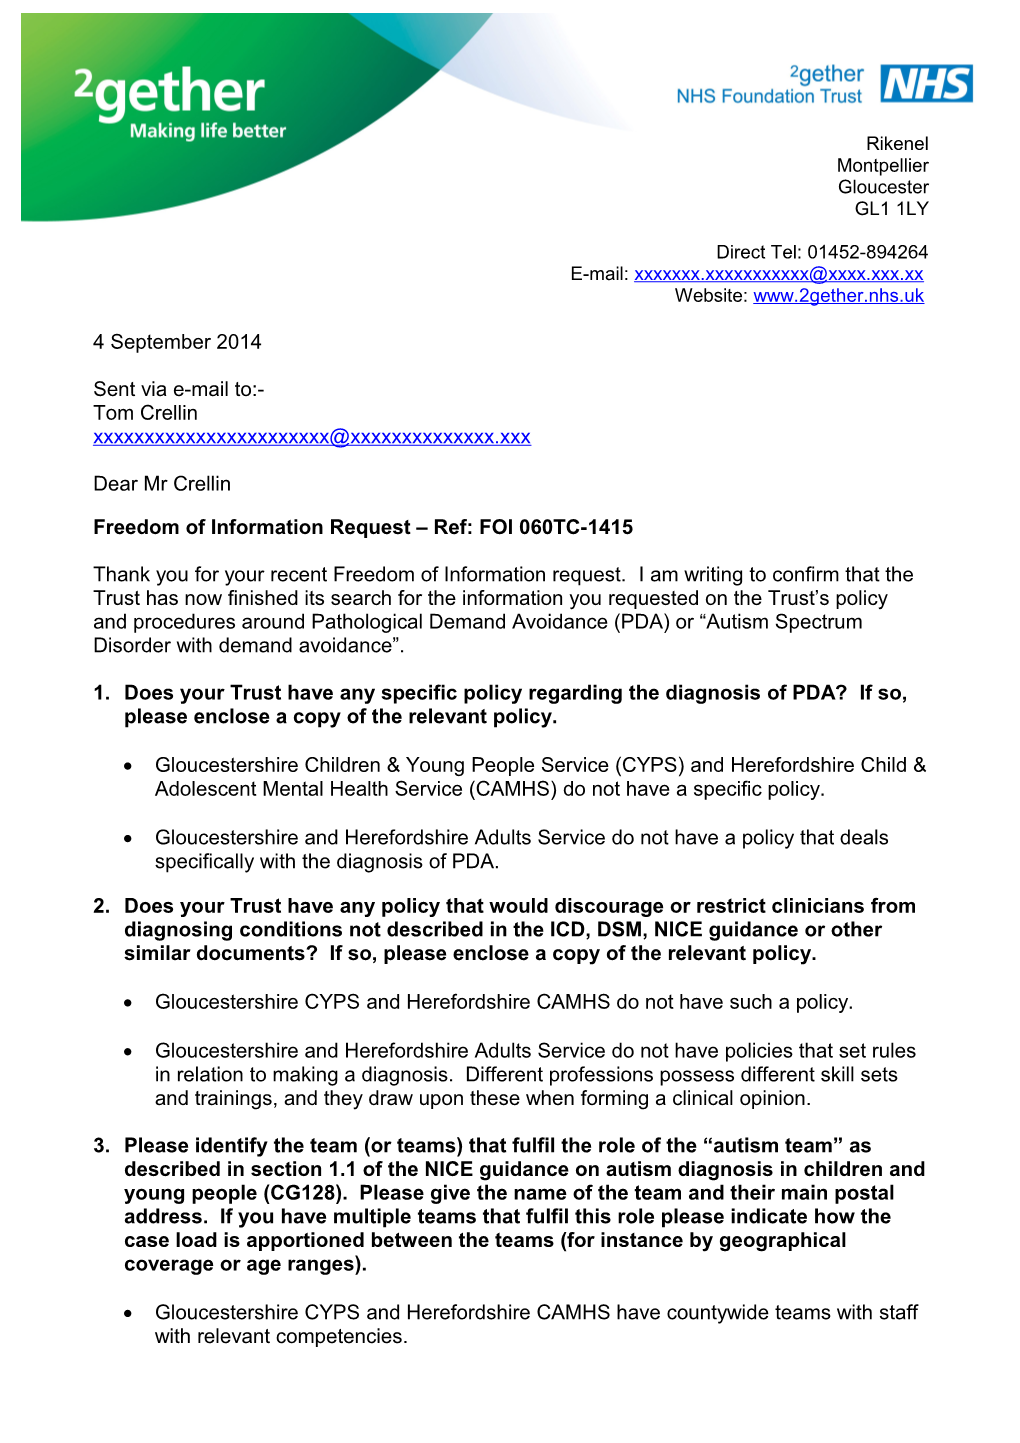 Freedom of Information Request Ref: FOI 060TC-1415